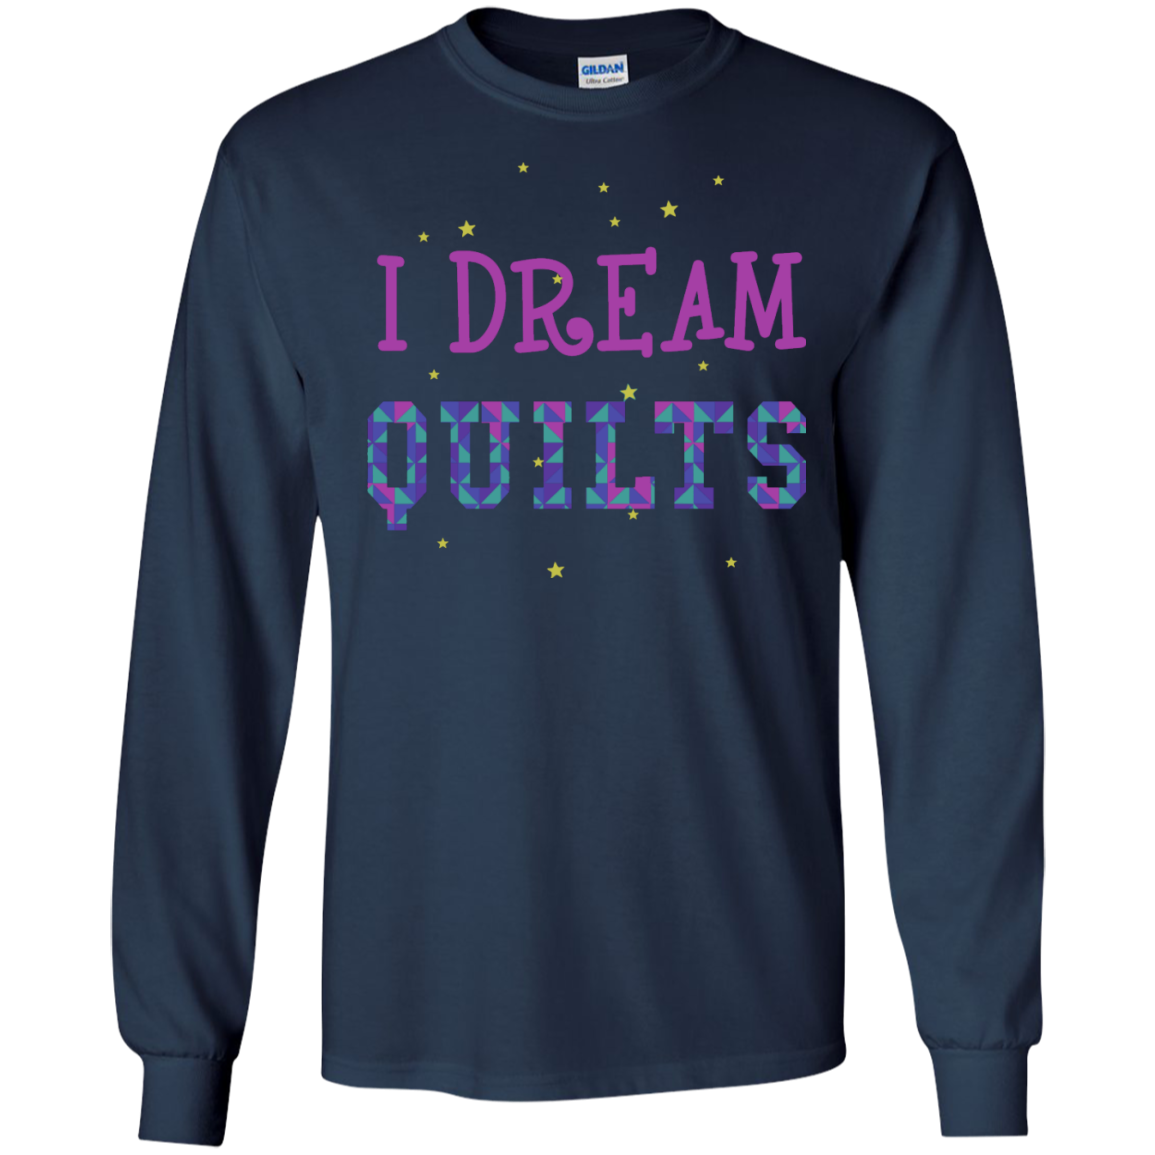 I Dream Quilts Long Sleeve Ultra Cotton T-Shirt - Crafter4Life - 6